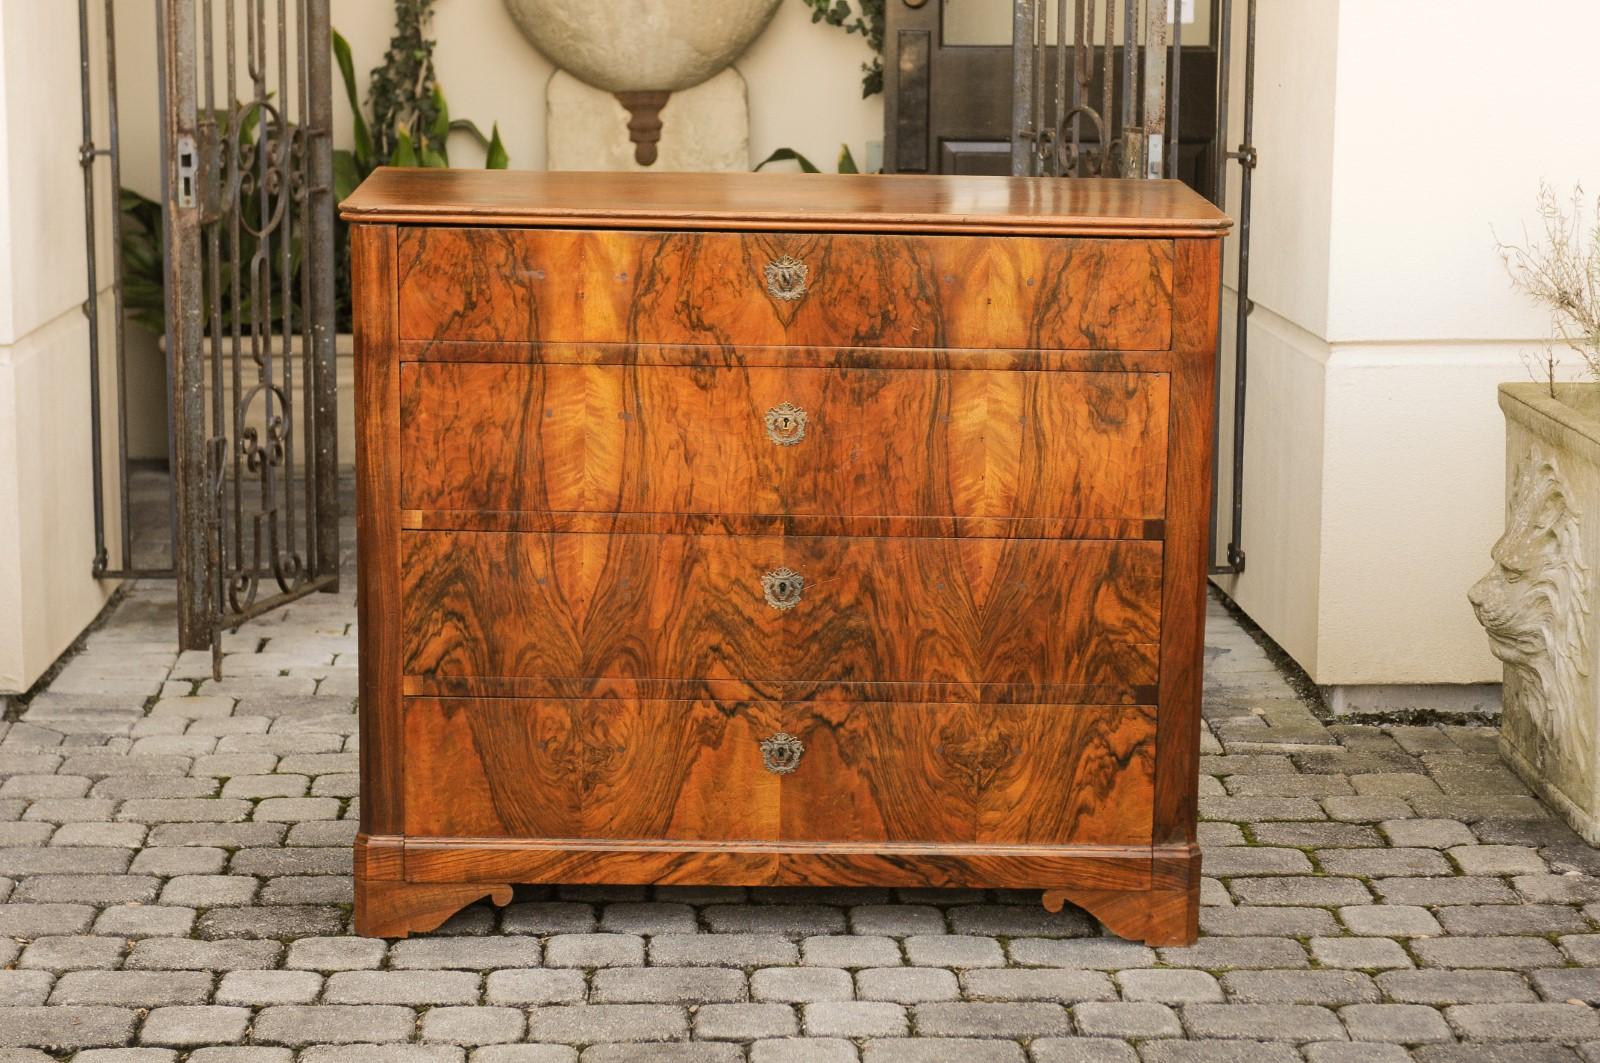 A French walnut four-drawer commode from the third quarter of the 19th century, with bookmarked veneer and bracket feet. Born in France at the end of the reign of France's last Emperor Napoleon III, this exquisite commode features a rectangular top